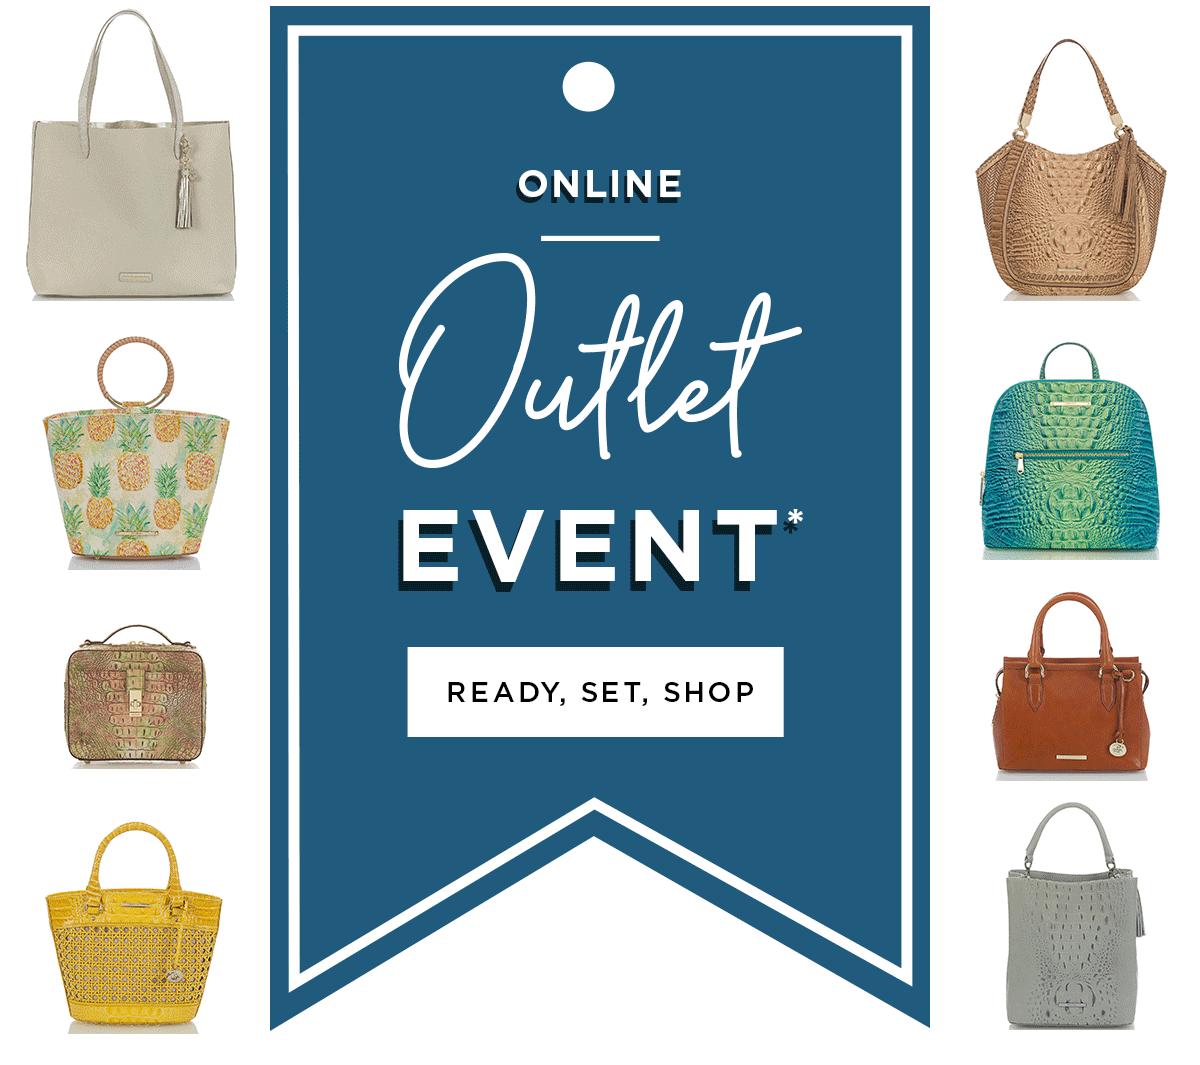 Brahmin Handbags - Savings and summer! ☀️ Shop our Outlet Event:   Ends tomorrow!